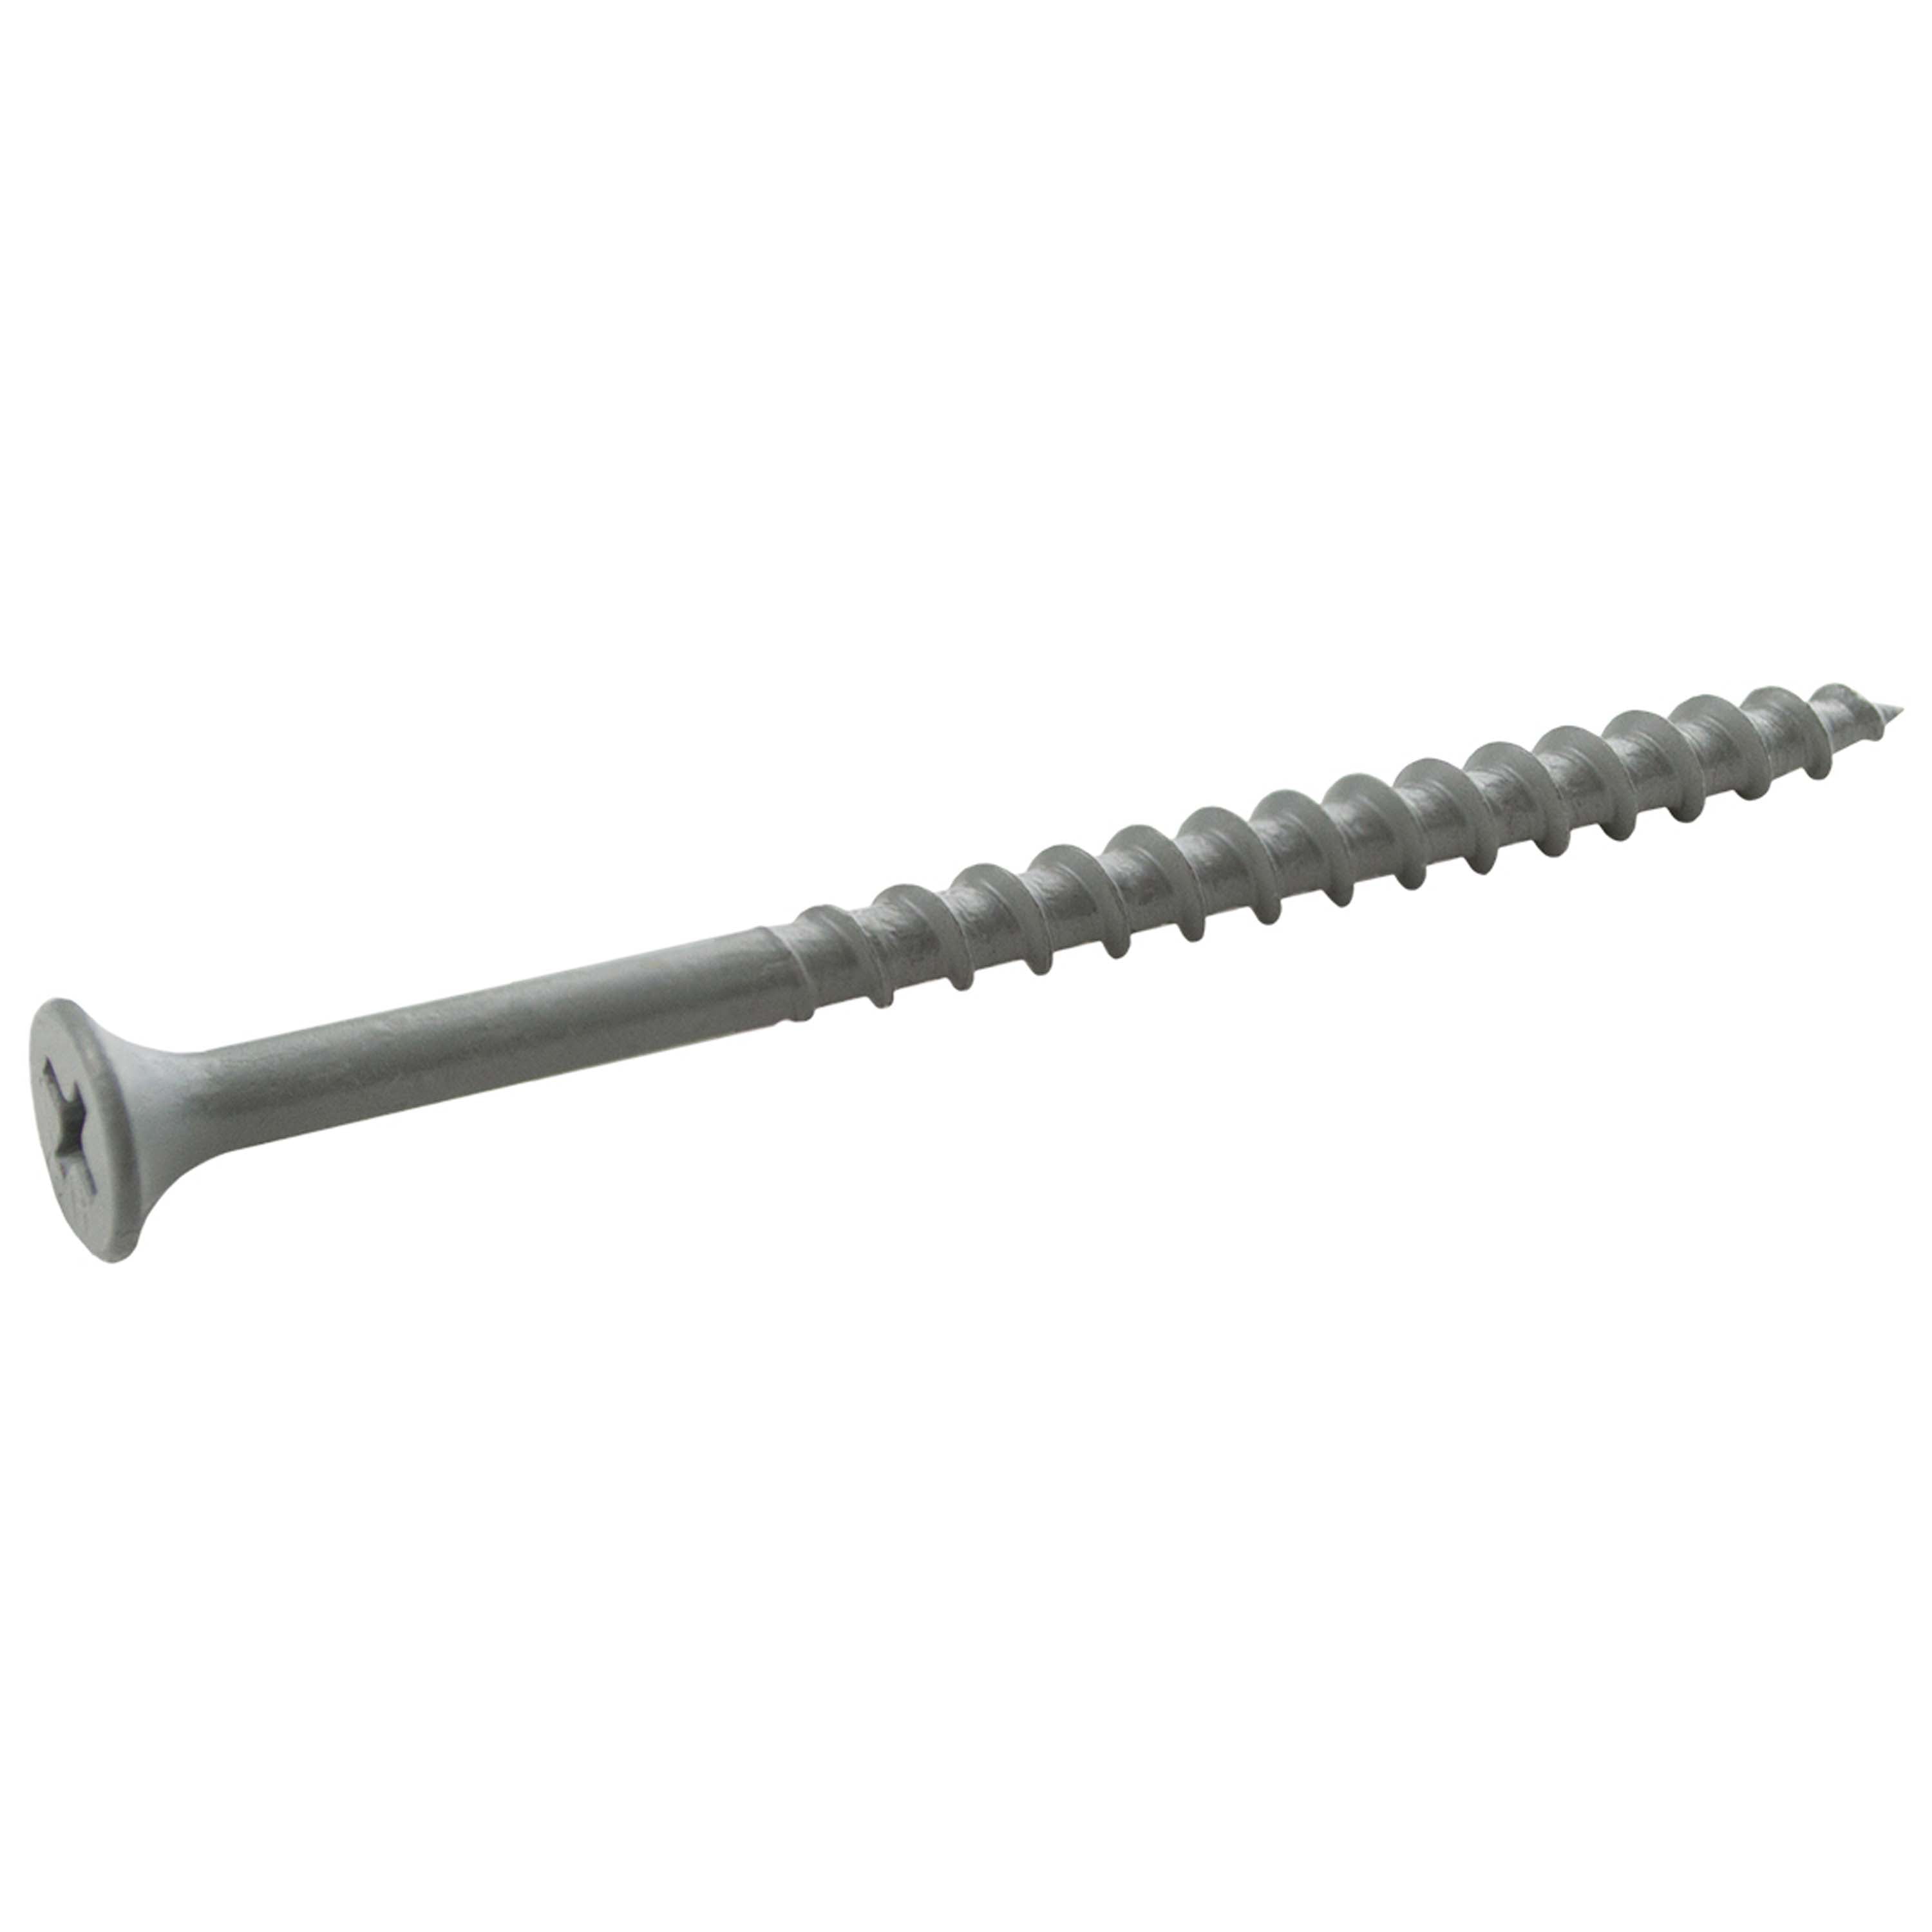 ACQ Rated/Coated Exterior Wood 1lb./Pack Grip-Rite Wood Screw #8 x 3 in